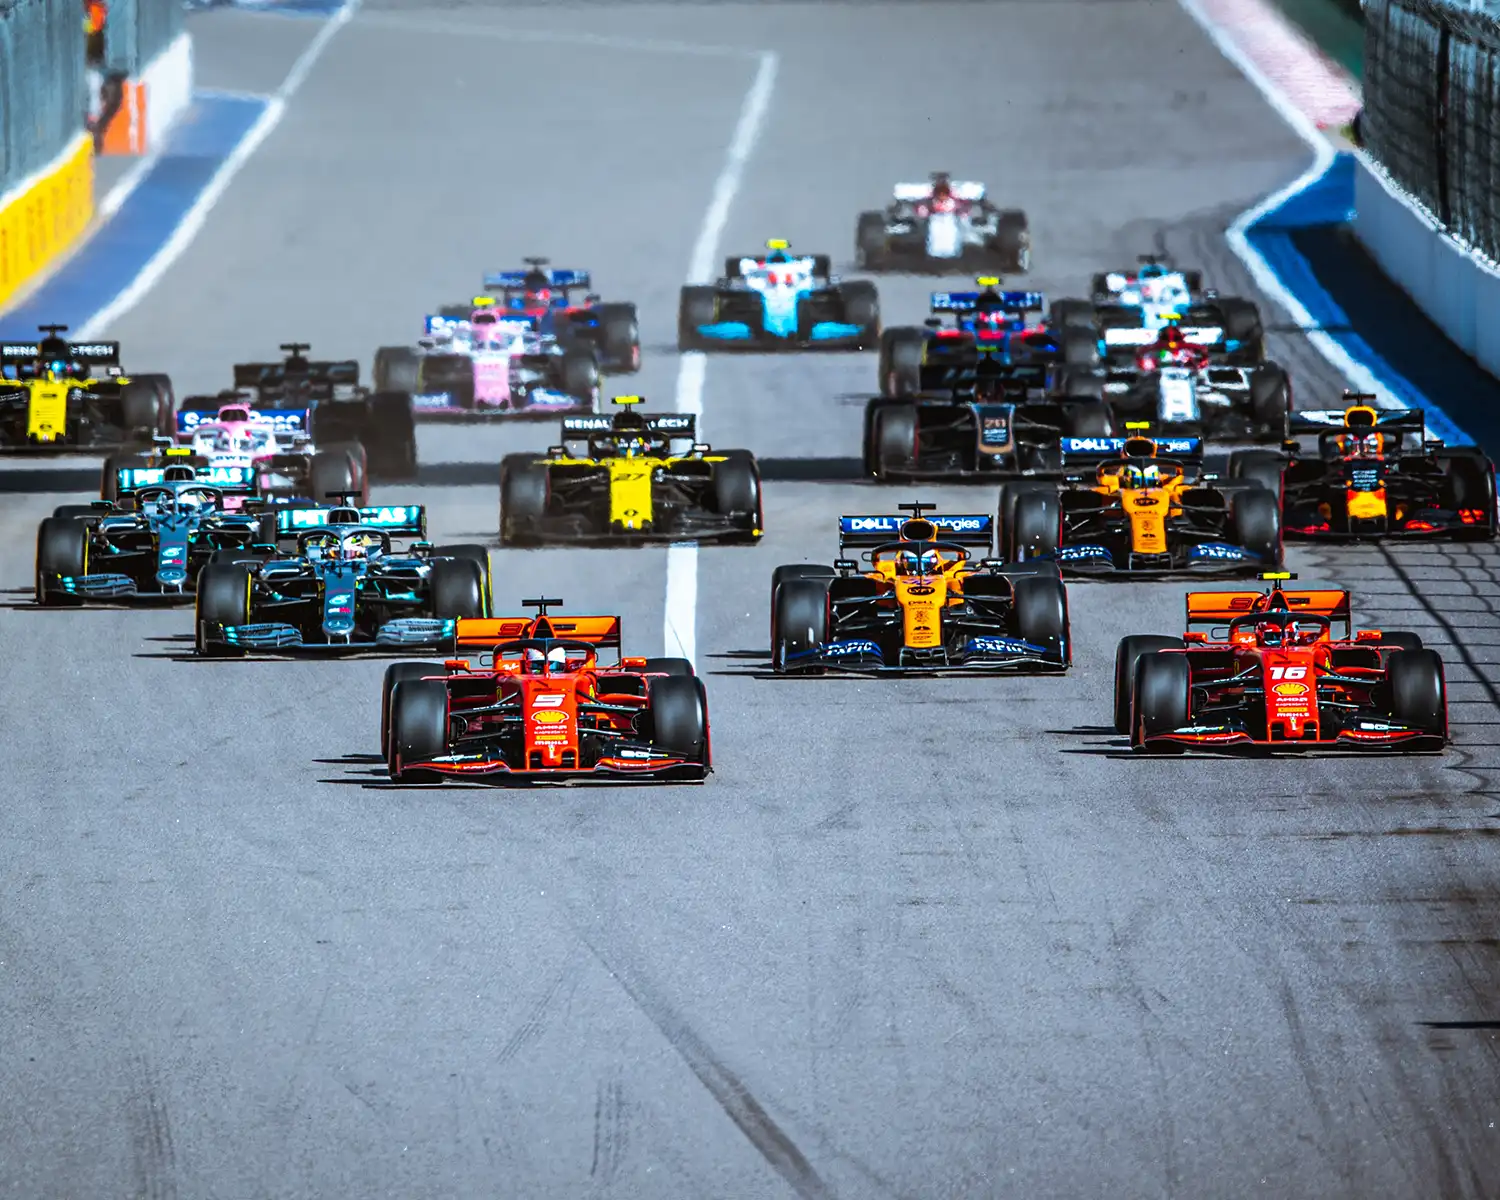 Strategies and betting on Formula 1